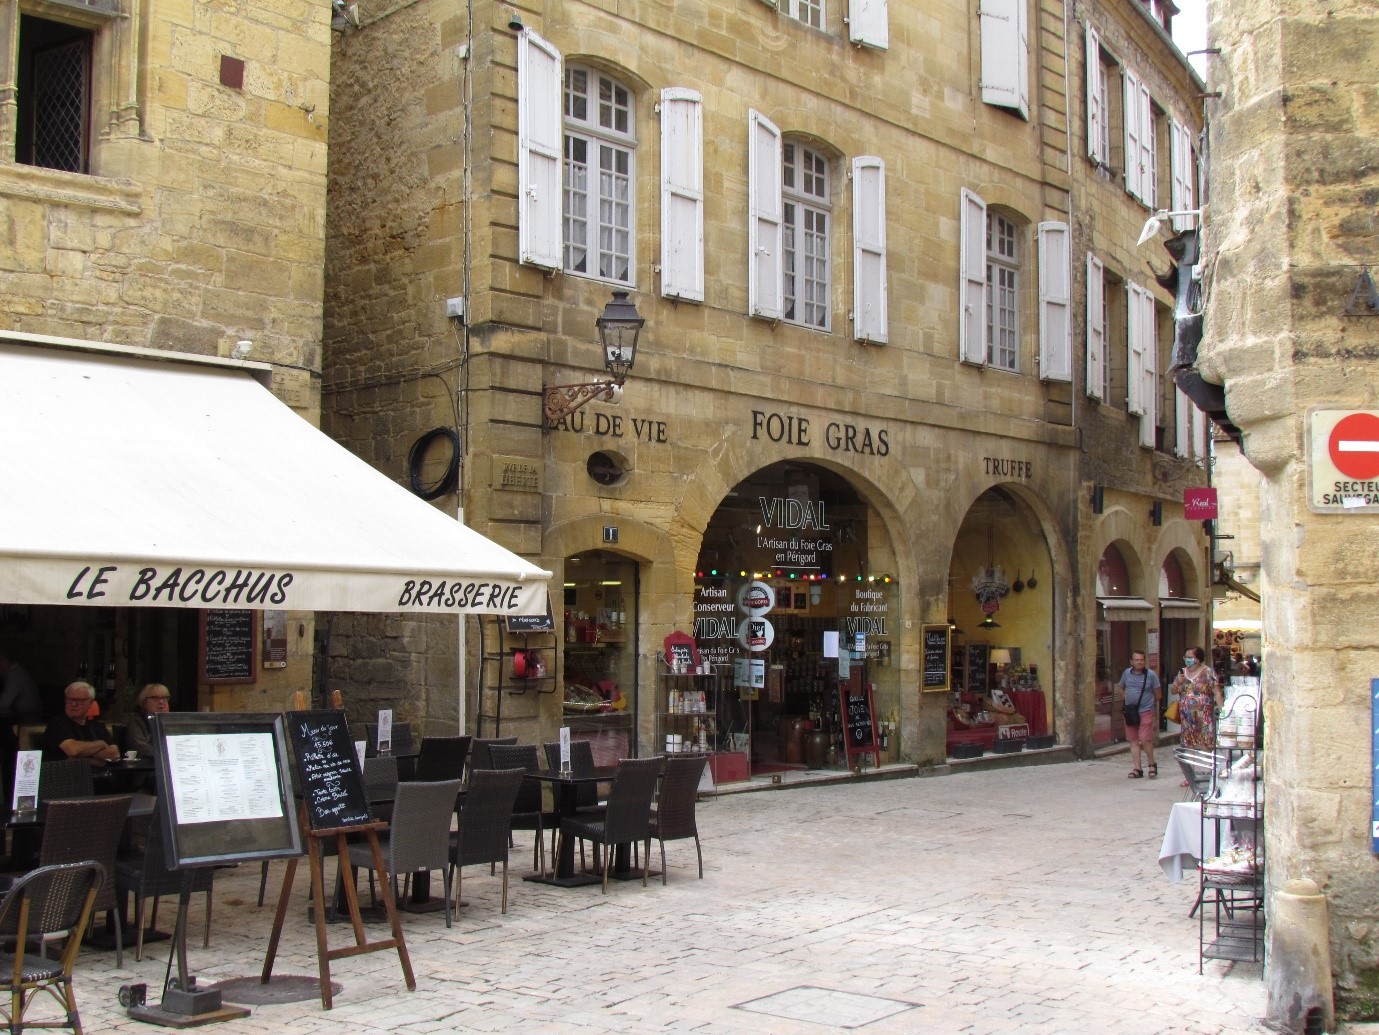 Toulouse & the Dordogne—A Richer, Affordable Life in France